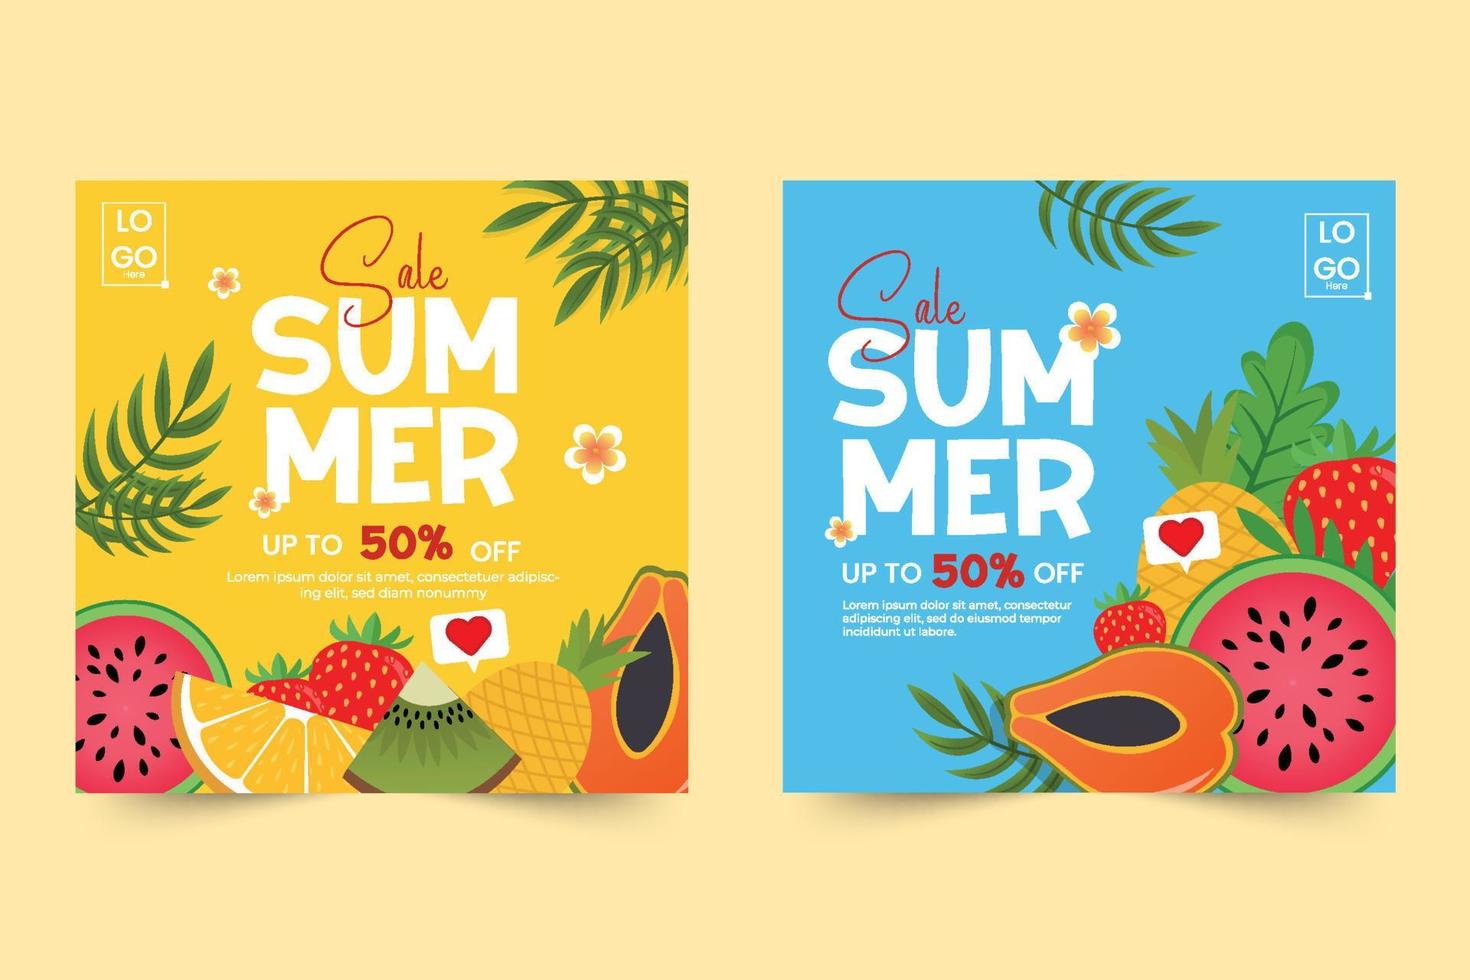 Summer sale graphic template vector